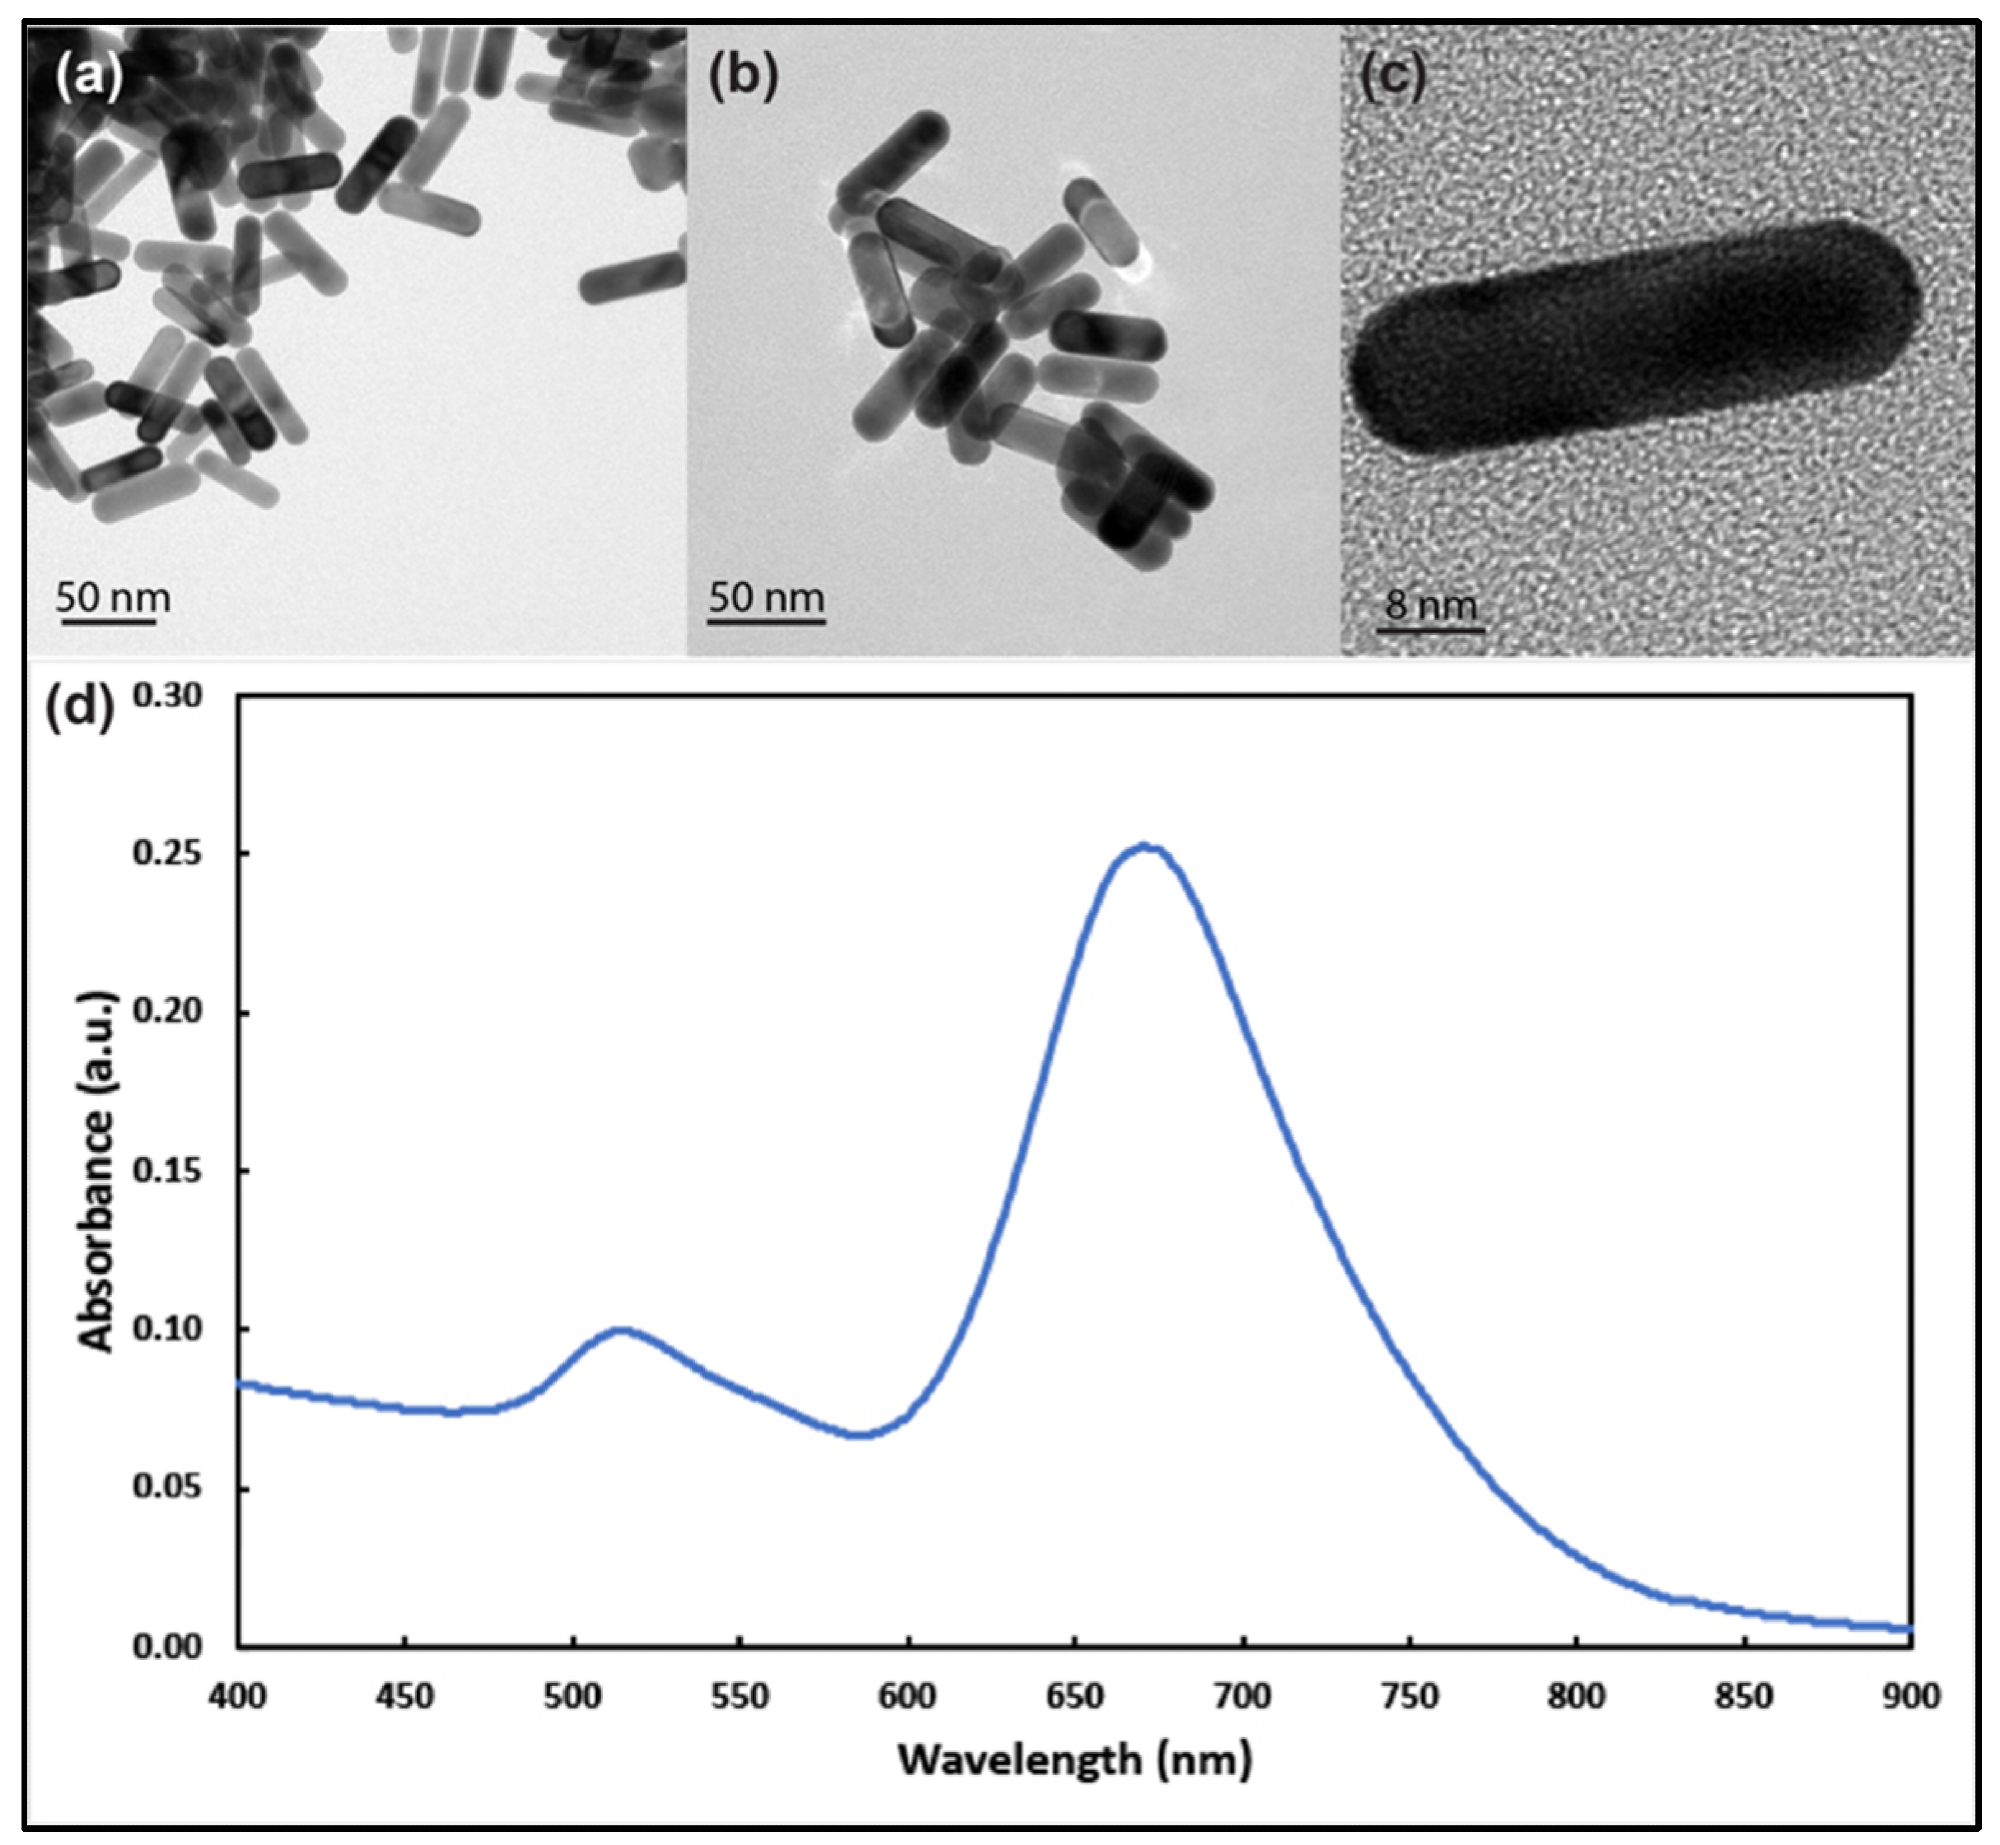 Transmission electron microscope images of gold nanorods with aspect ratio around 3 at different magnifications (a–c). (d) UV–visible spectrum analysis of the prepared gold nanorods showing longitudinal and transverse plasmons around 690 nm and 514 nm, respectively.